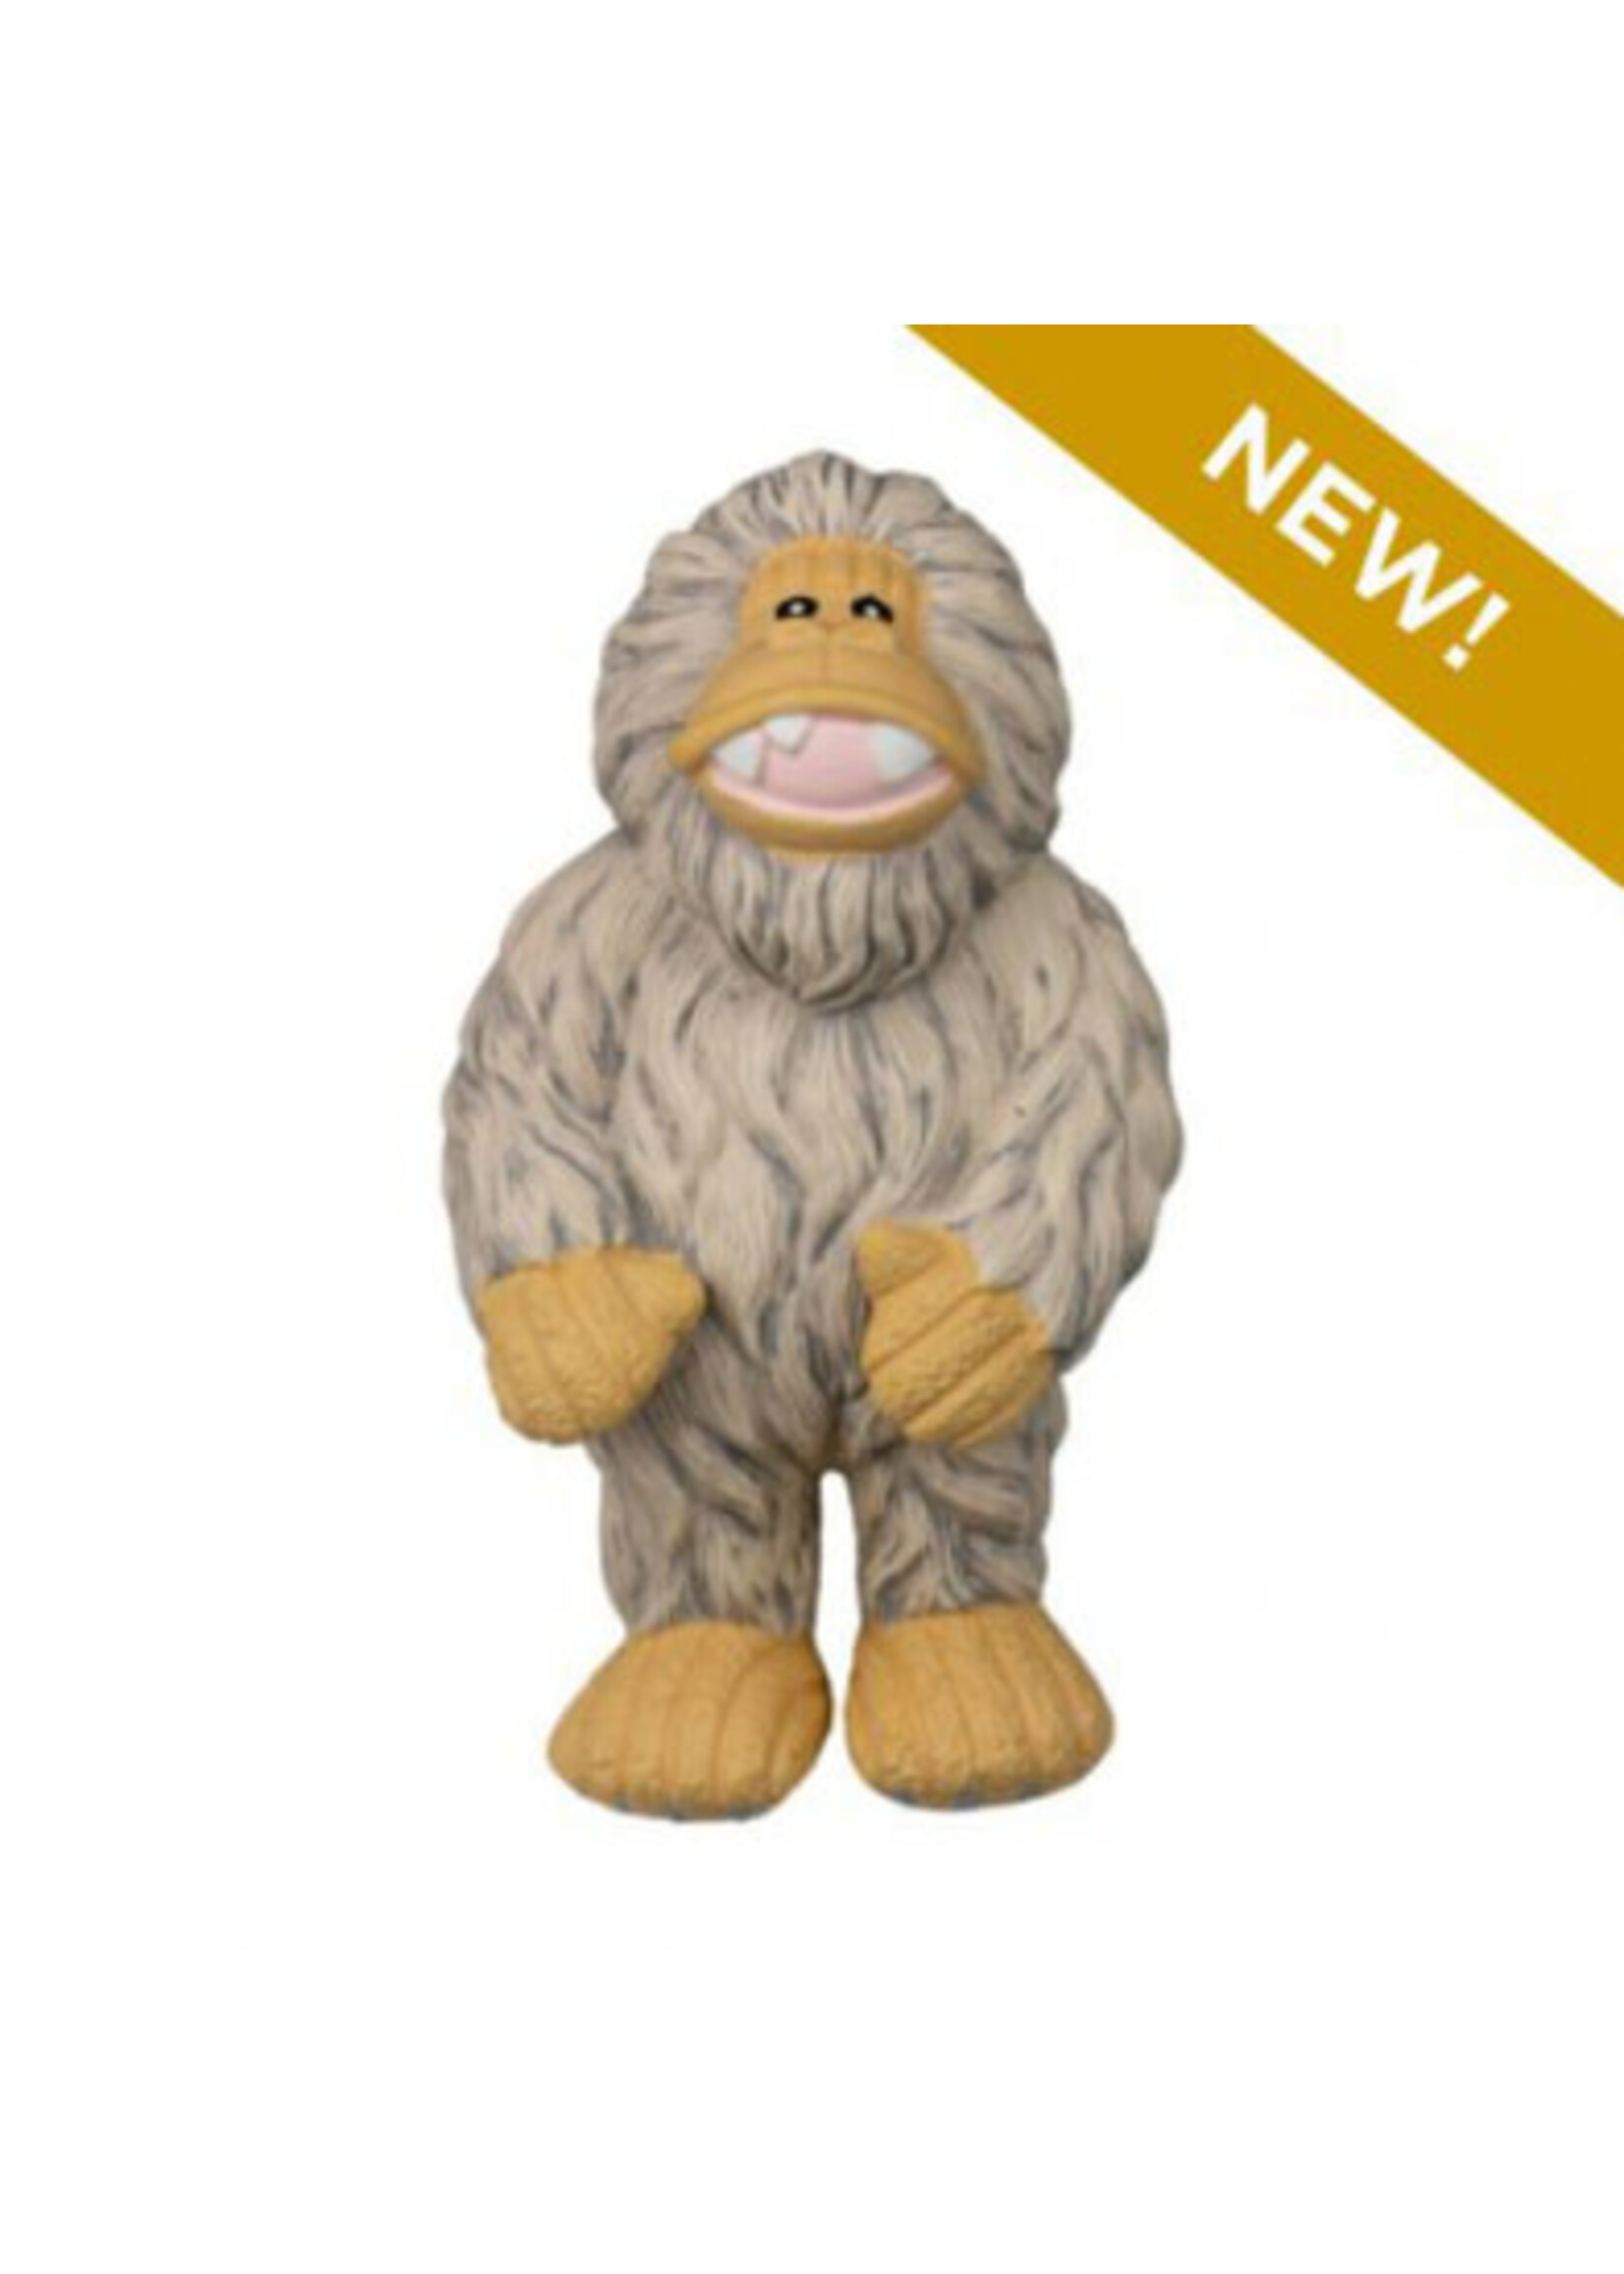 Tall Tails Tall Tails - Latex Yeti Squeaker Toy